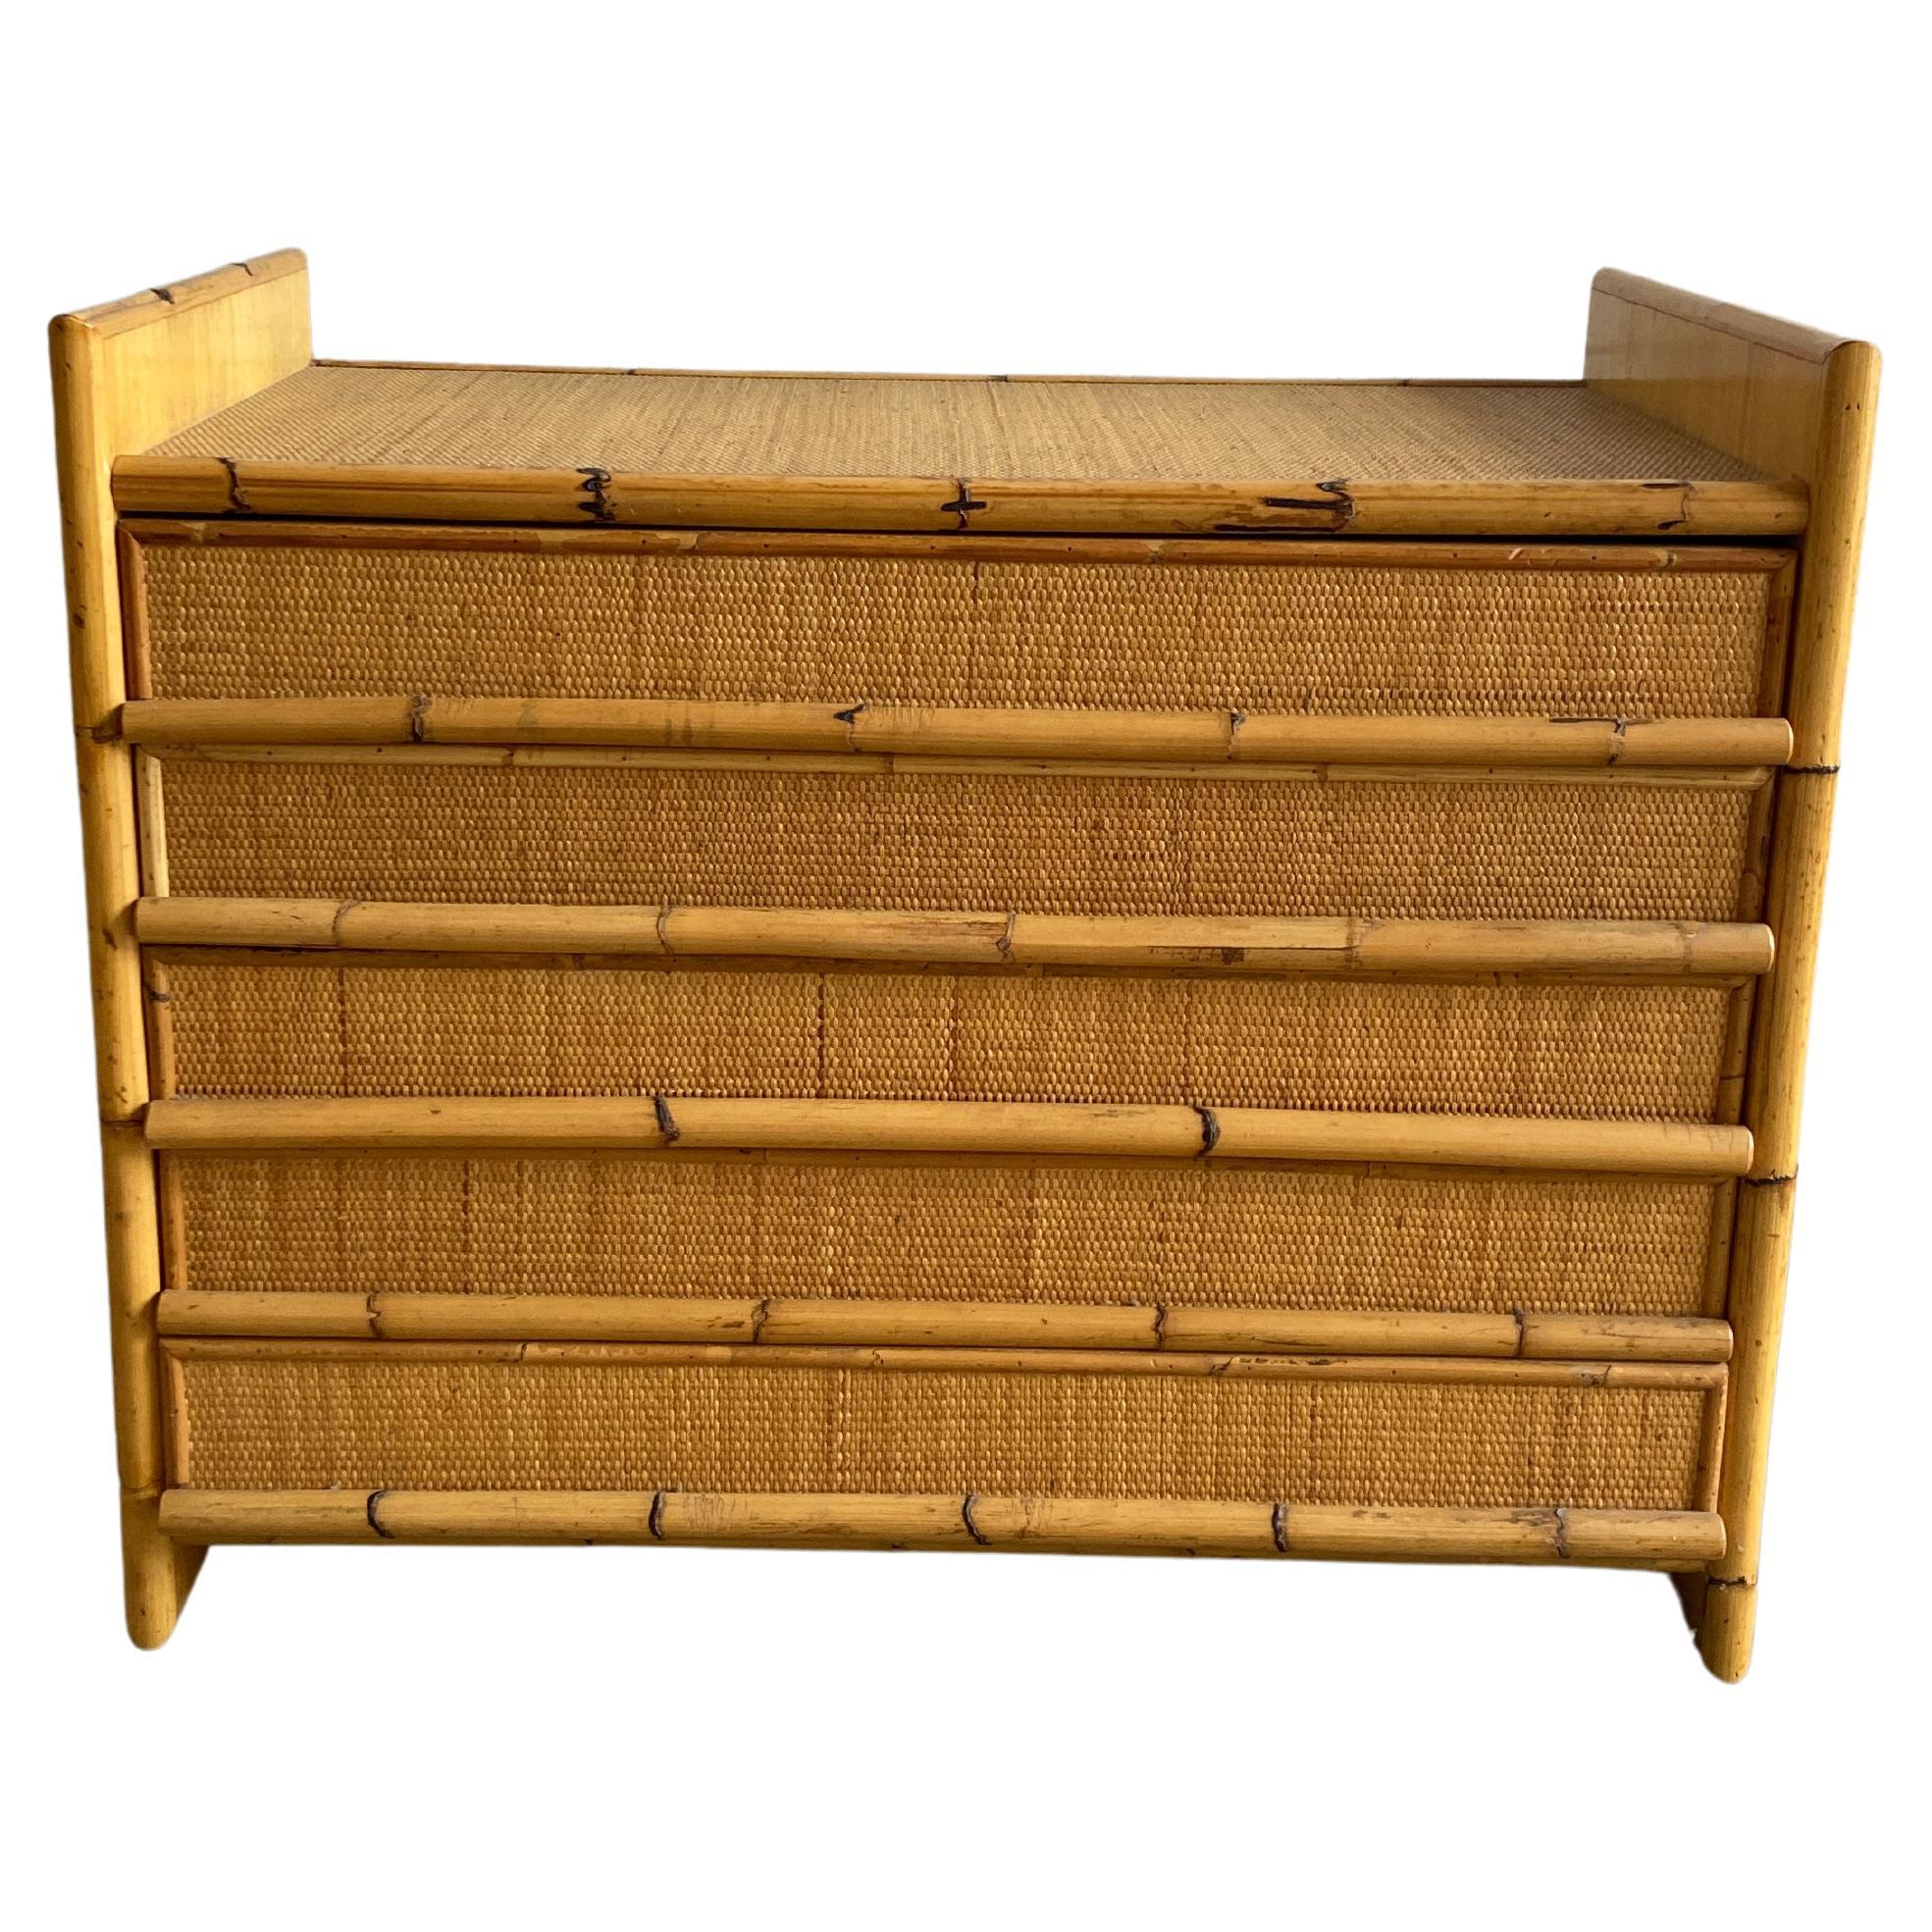 Mid-Century Modern Italian Bamboo and Rattan Dresser with 5 Drawers, 1970s For Sale